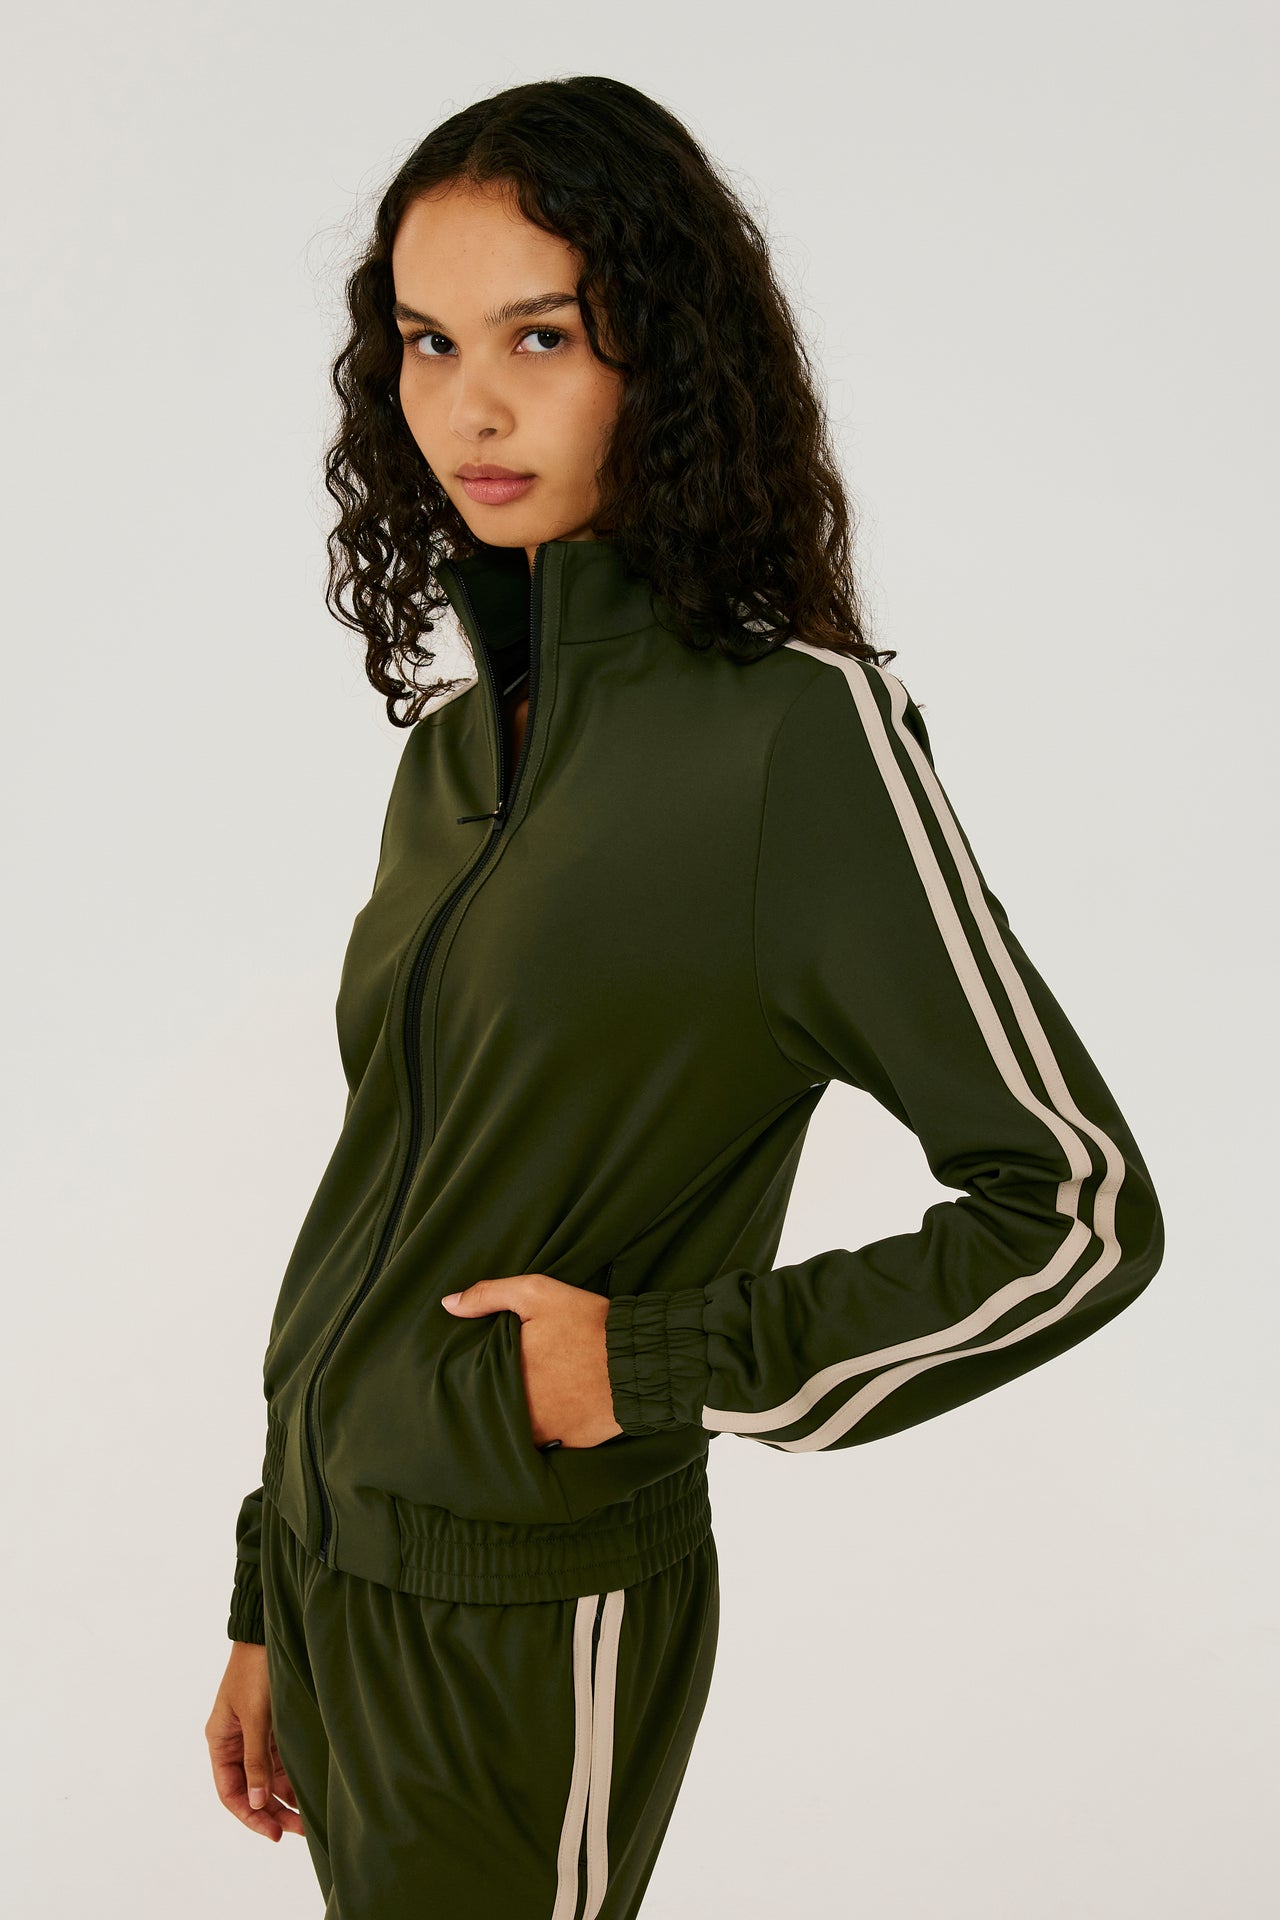 Side view of girl wearing dark green zip jacket that stops under chin with two white stripes down the side and a dark green sweatpants